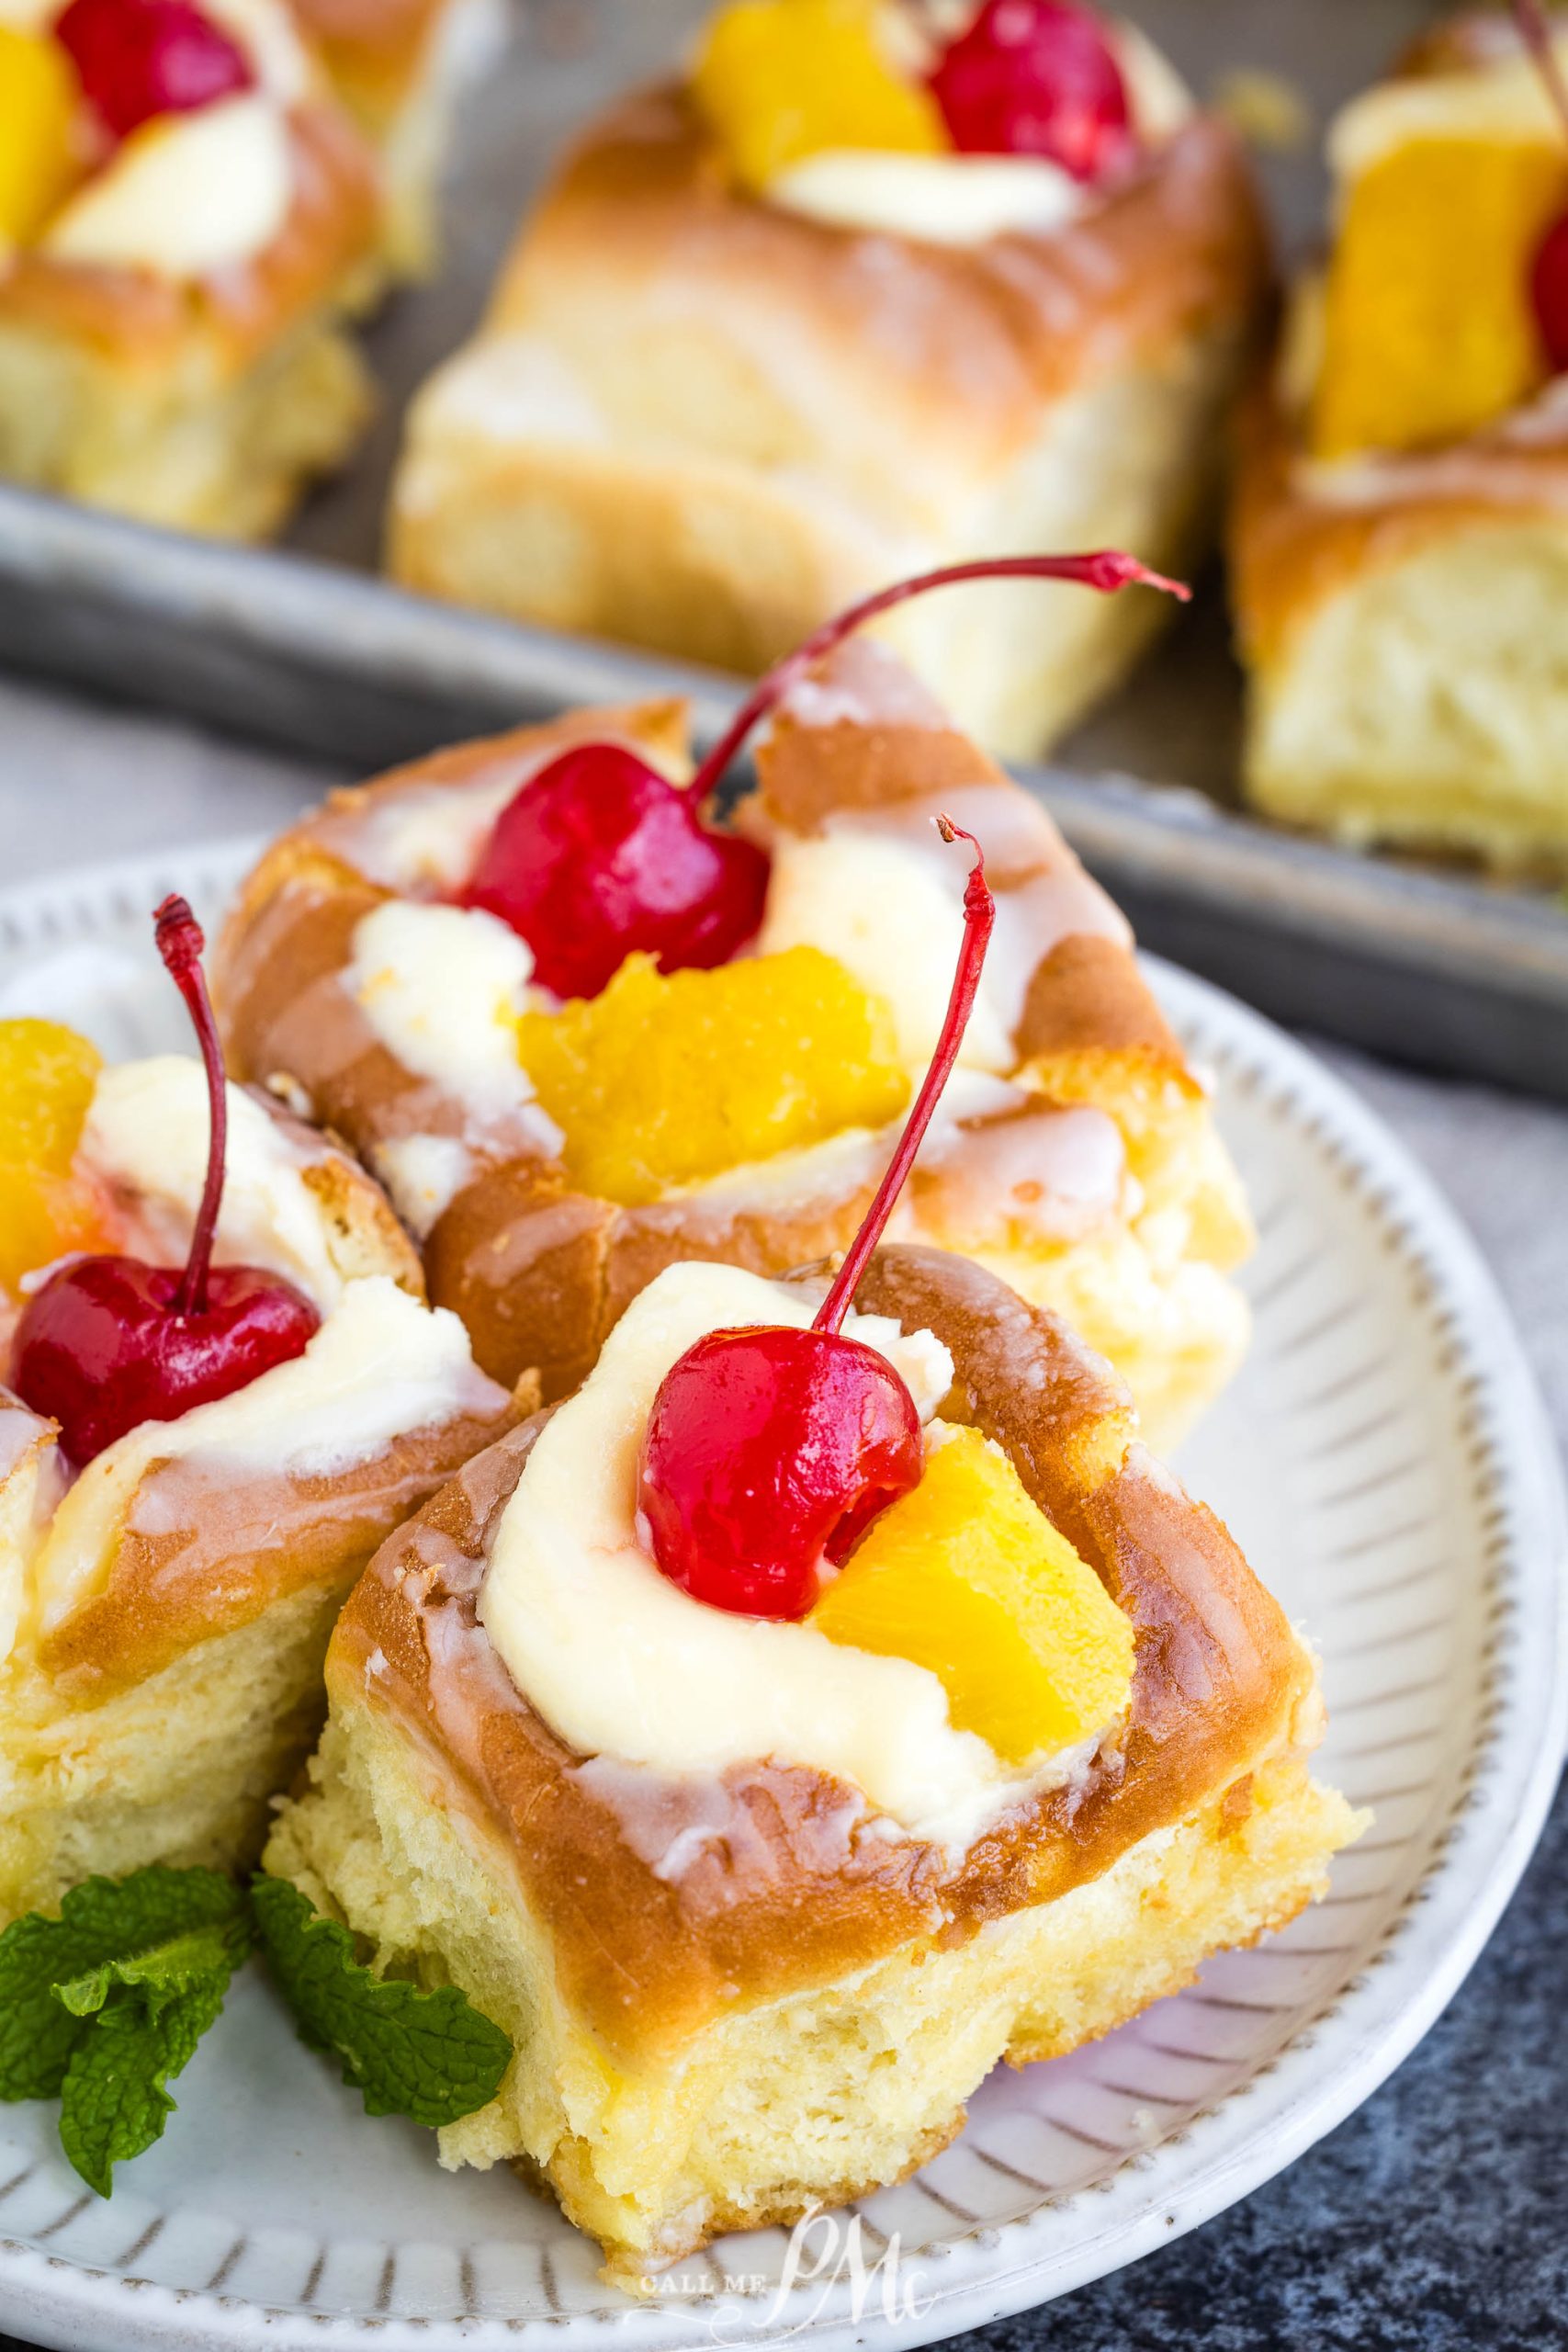 A plate of fruit-topped sweet rolls with glaze, garnished with cherries and mint leaves.